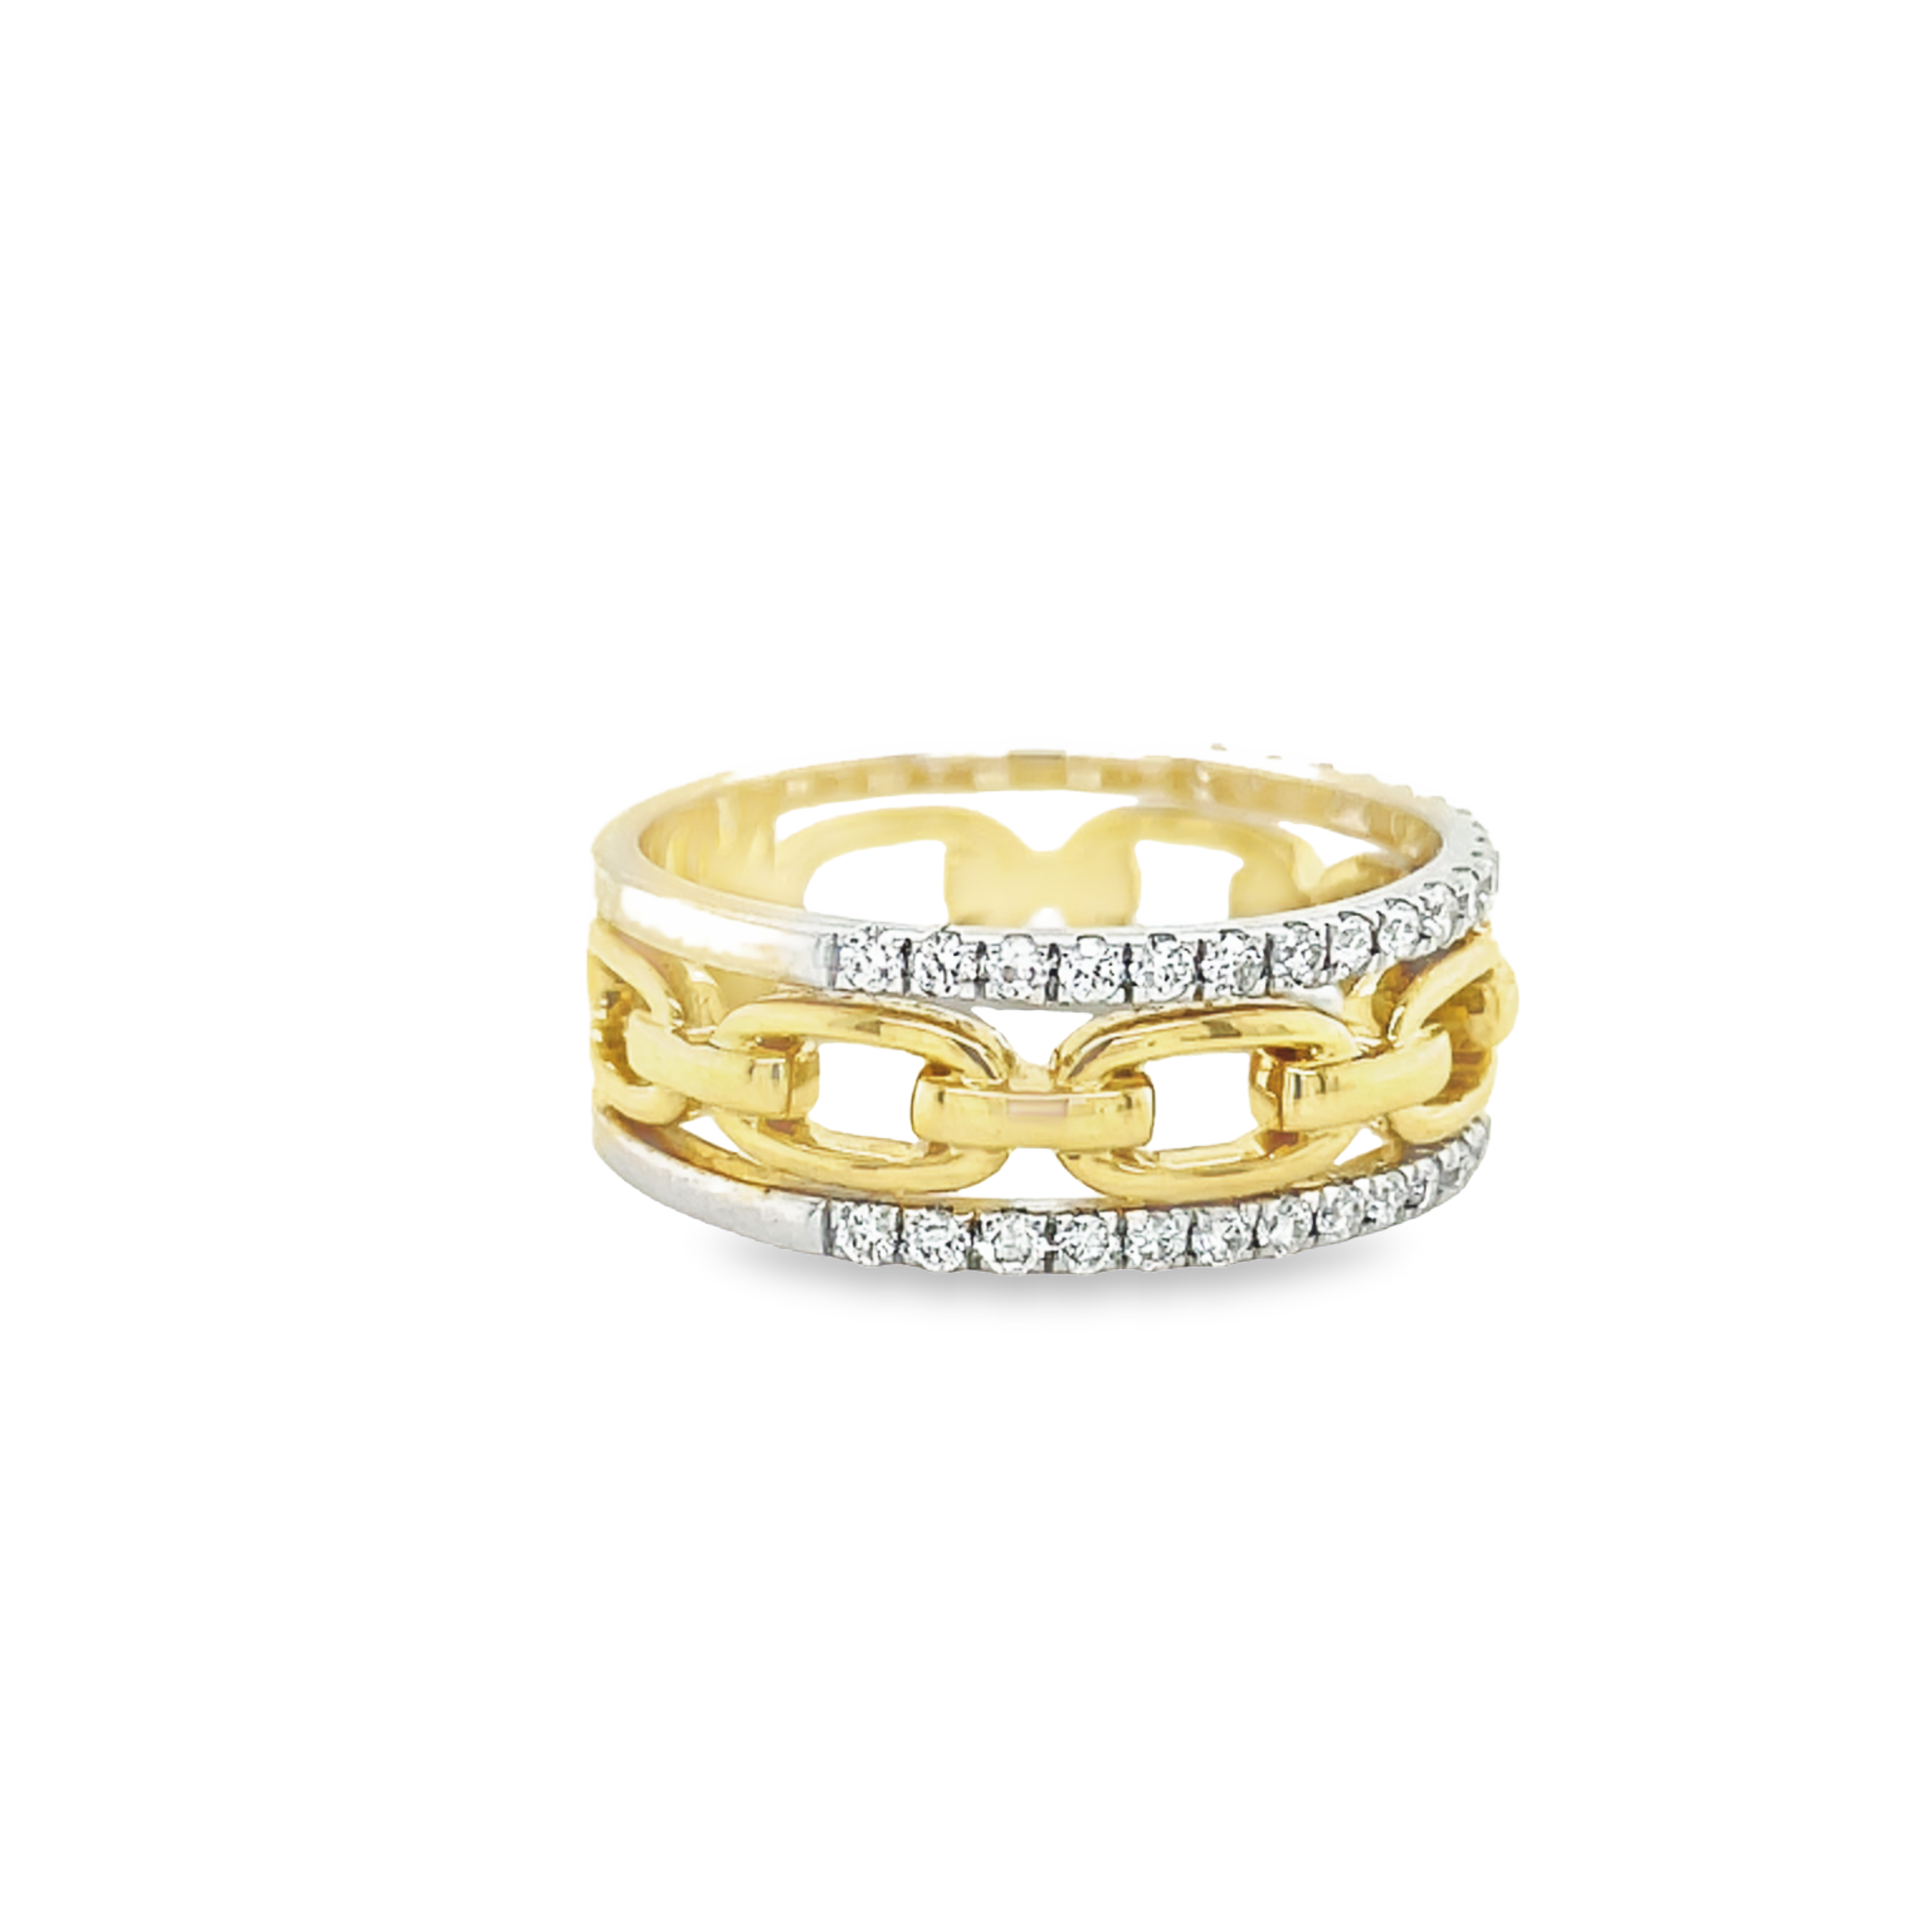 Glimmering with 0.38 carats of diamonds, this stunning 14k yellow gold eternity ring set is like three pieces of fine jewelry in one! Its design features two rows of glittering eternity bands and a polished chain link band for a unique and timeless style. Size 6.